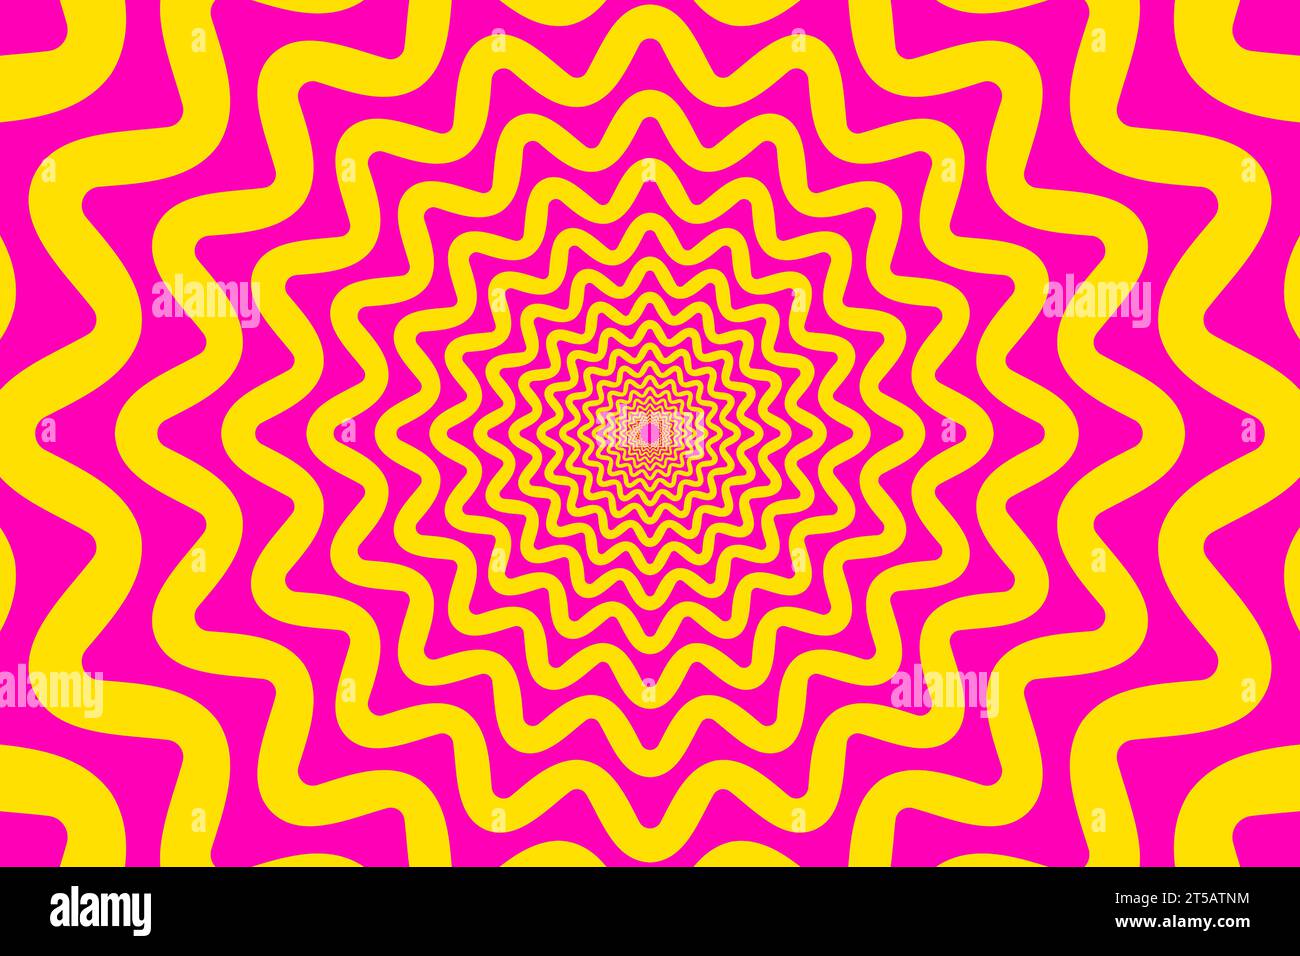 Starburst abstract Psychedelic background. vector illustration Stock Vector